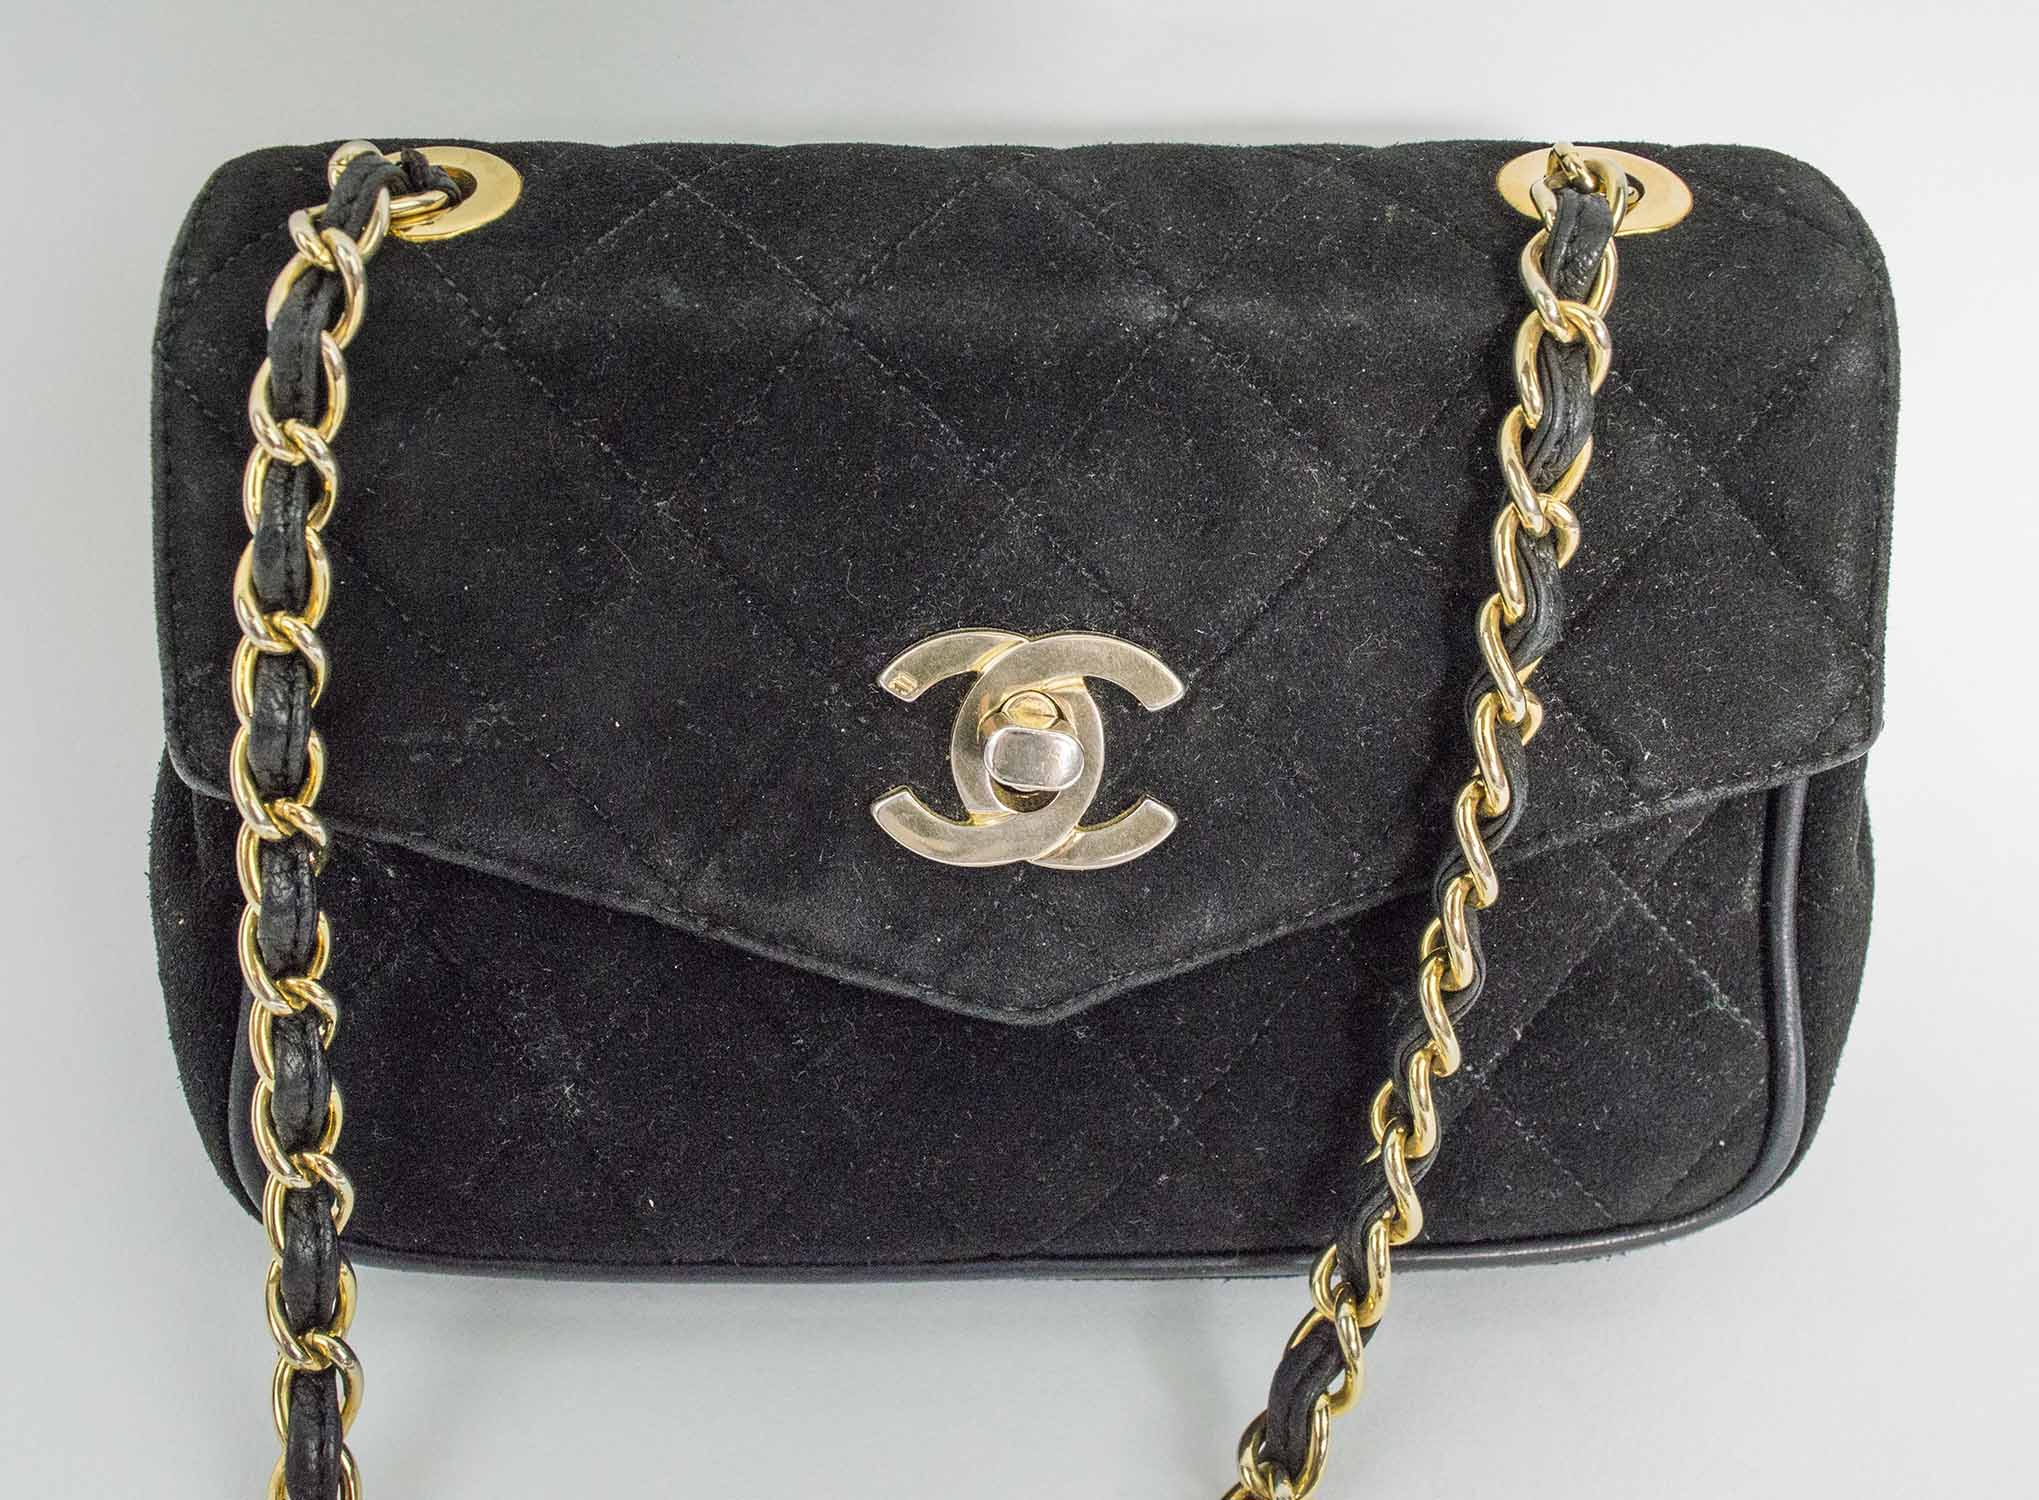 CHANEL VINTAGE SHOULDER/CROSSBODY BAG, iconic diamond quilted black suede  with matching leather interior, interwoven leather and chain strap, 17cm x  11cm H x 4.5cm.